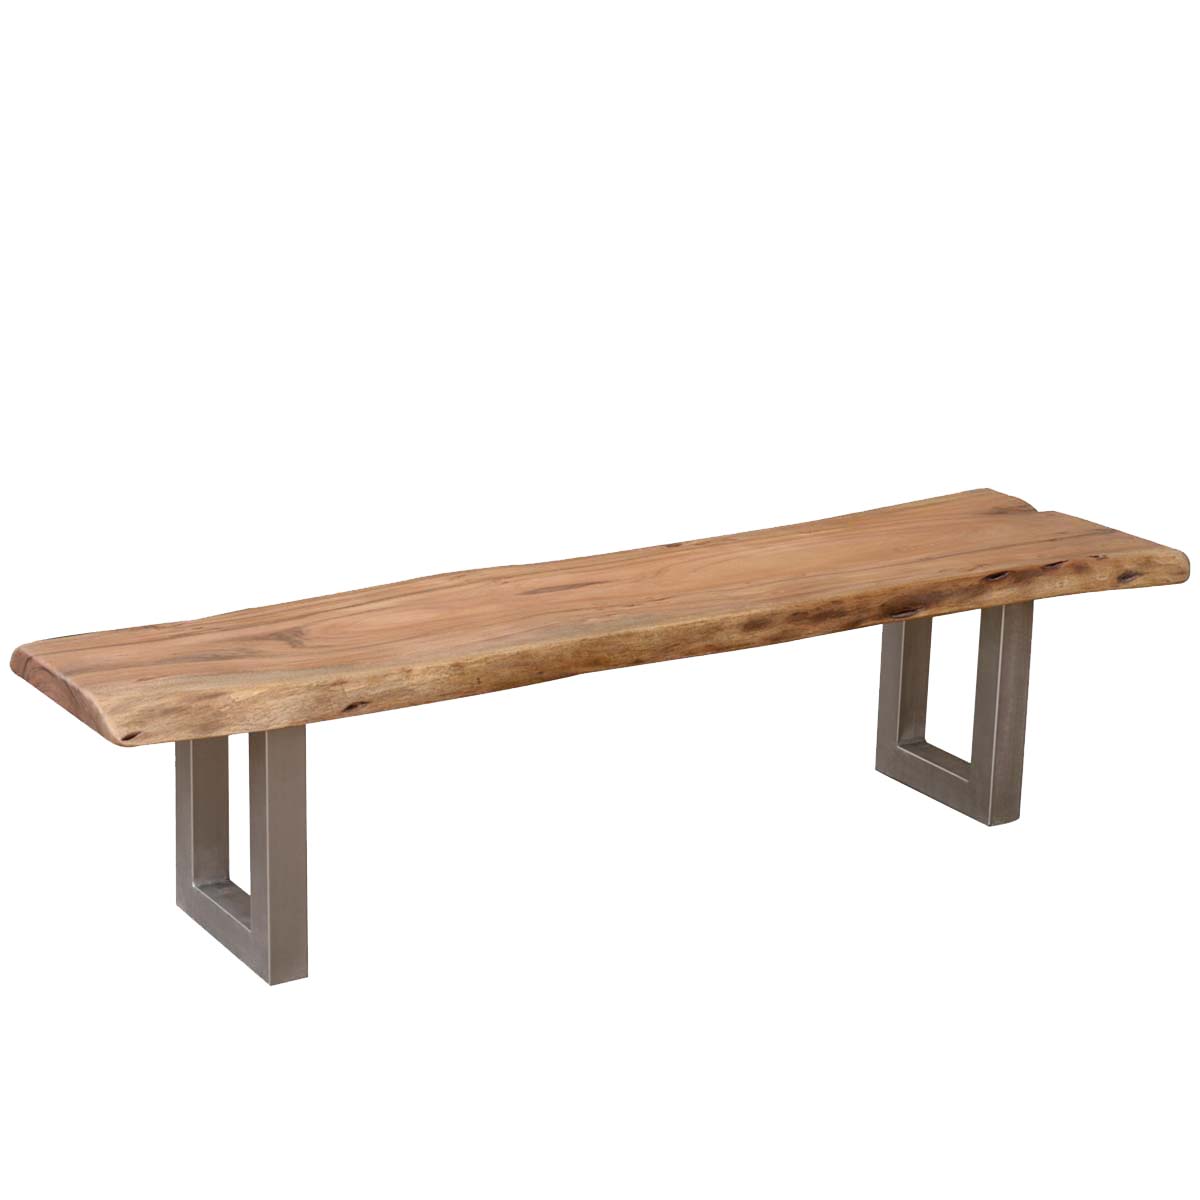 rustic dining table with bench photo - 1